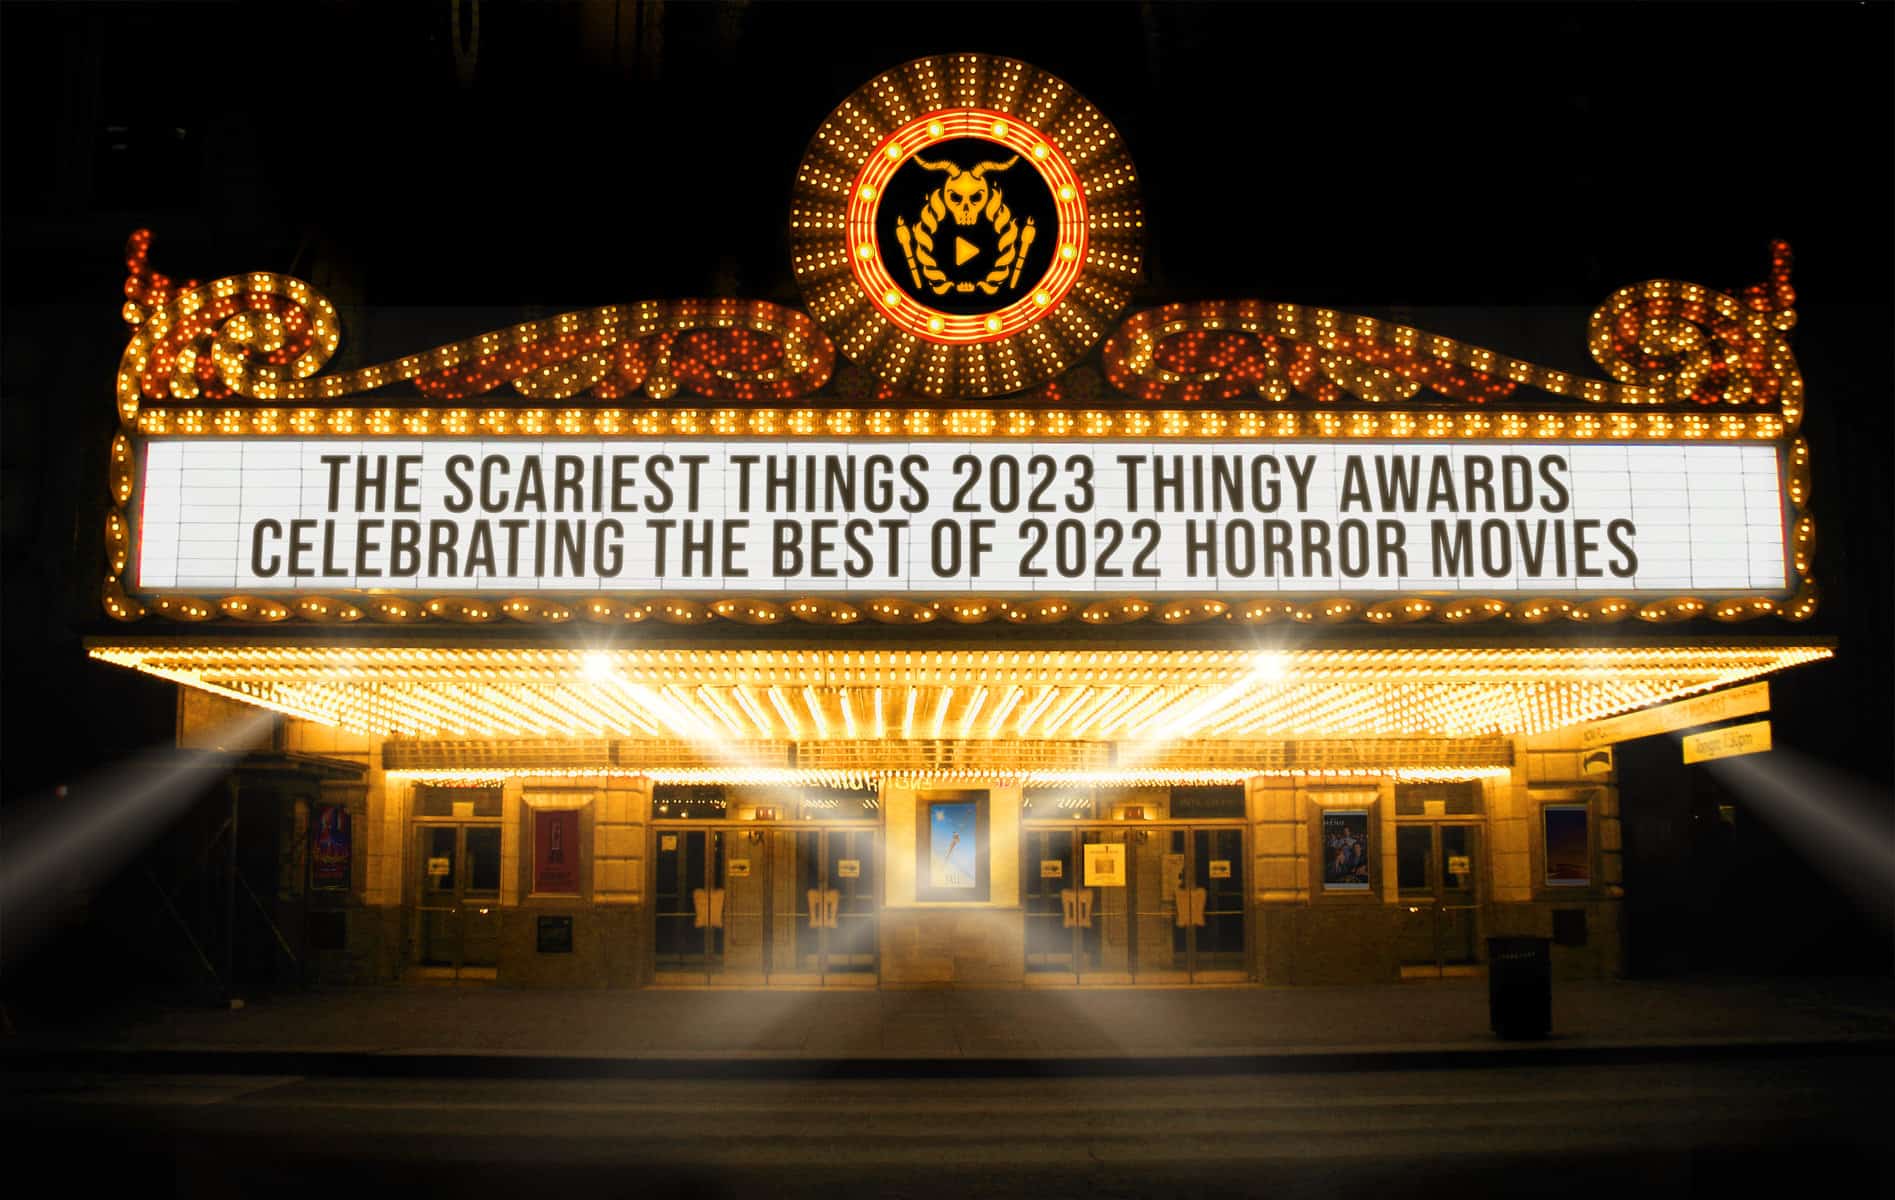 The Scariest Things Podcast Episode 168: The 2023 Thingy Awards